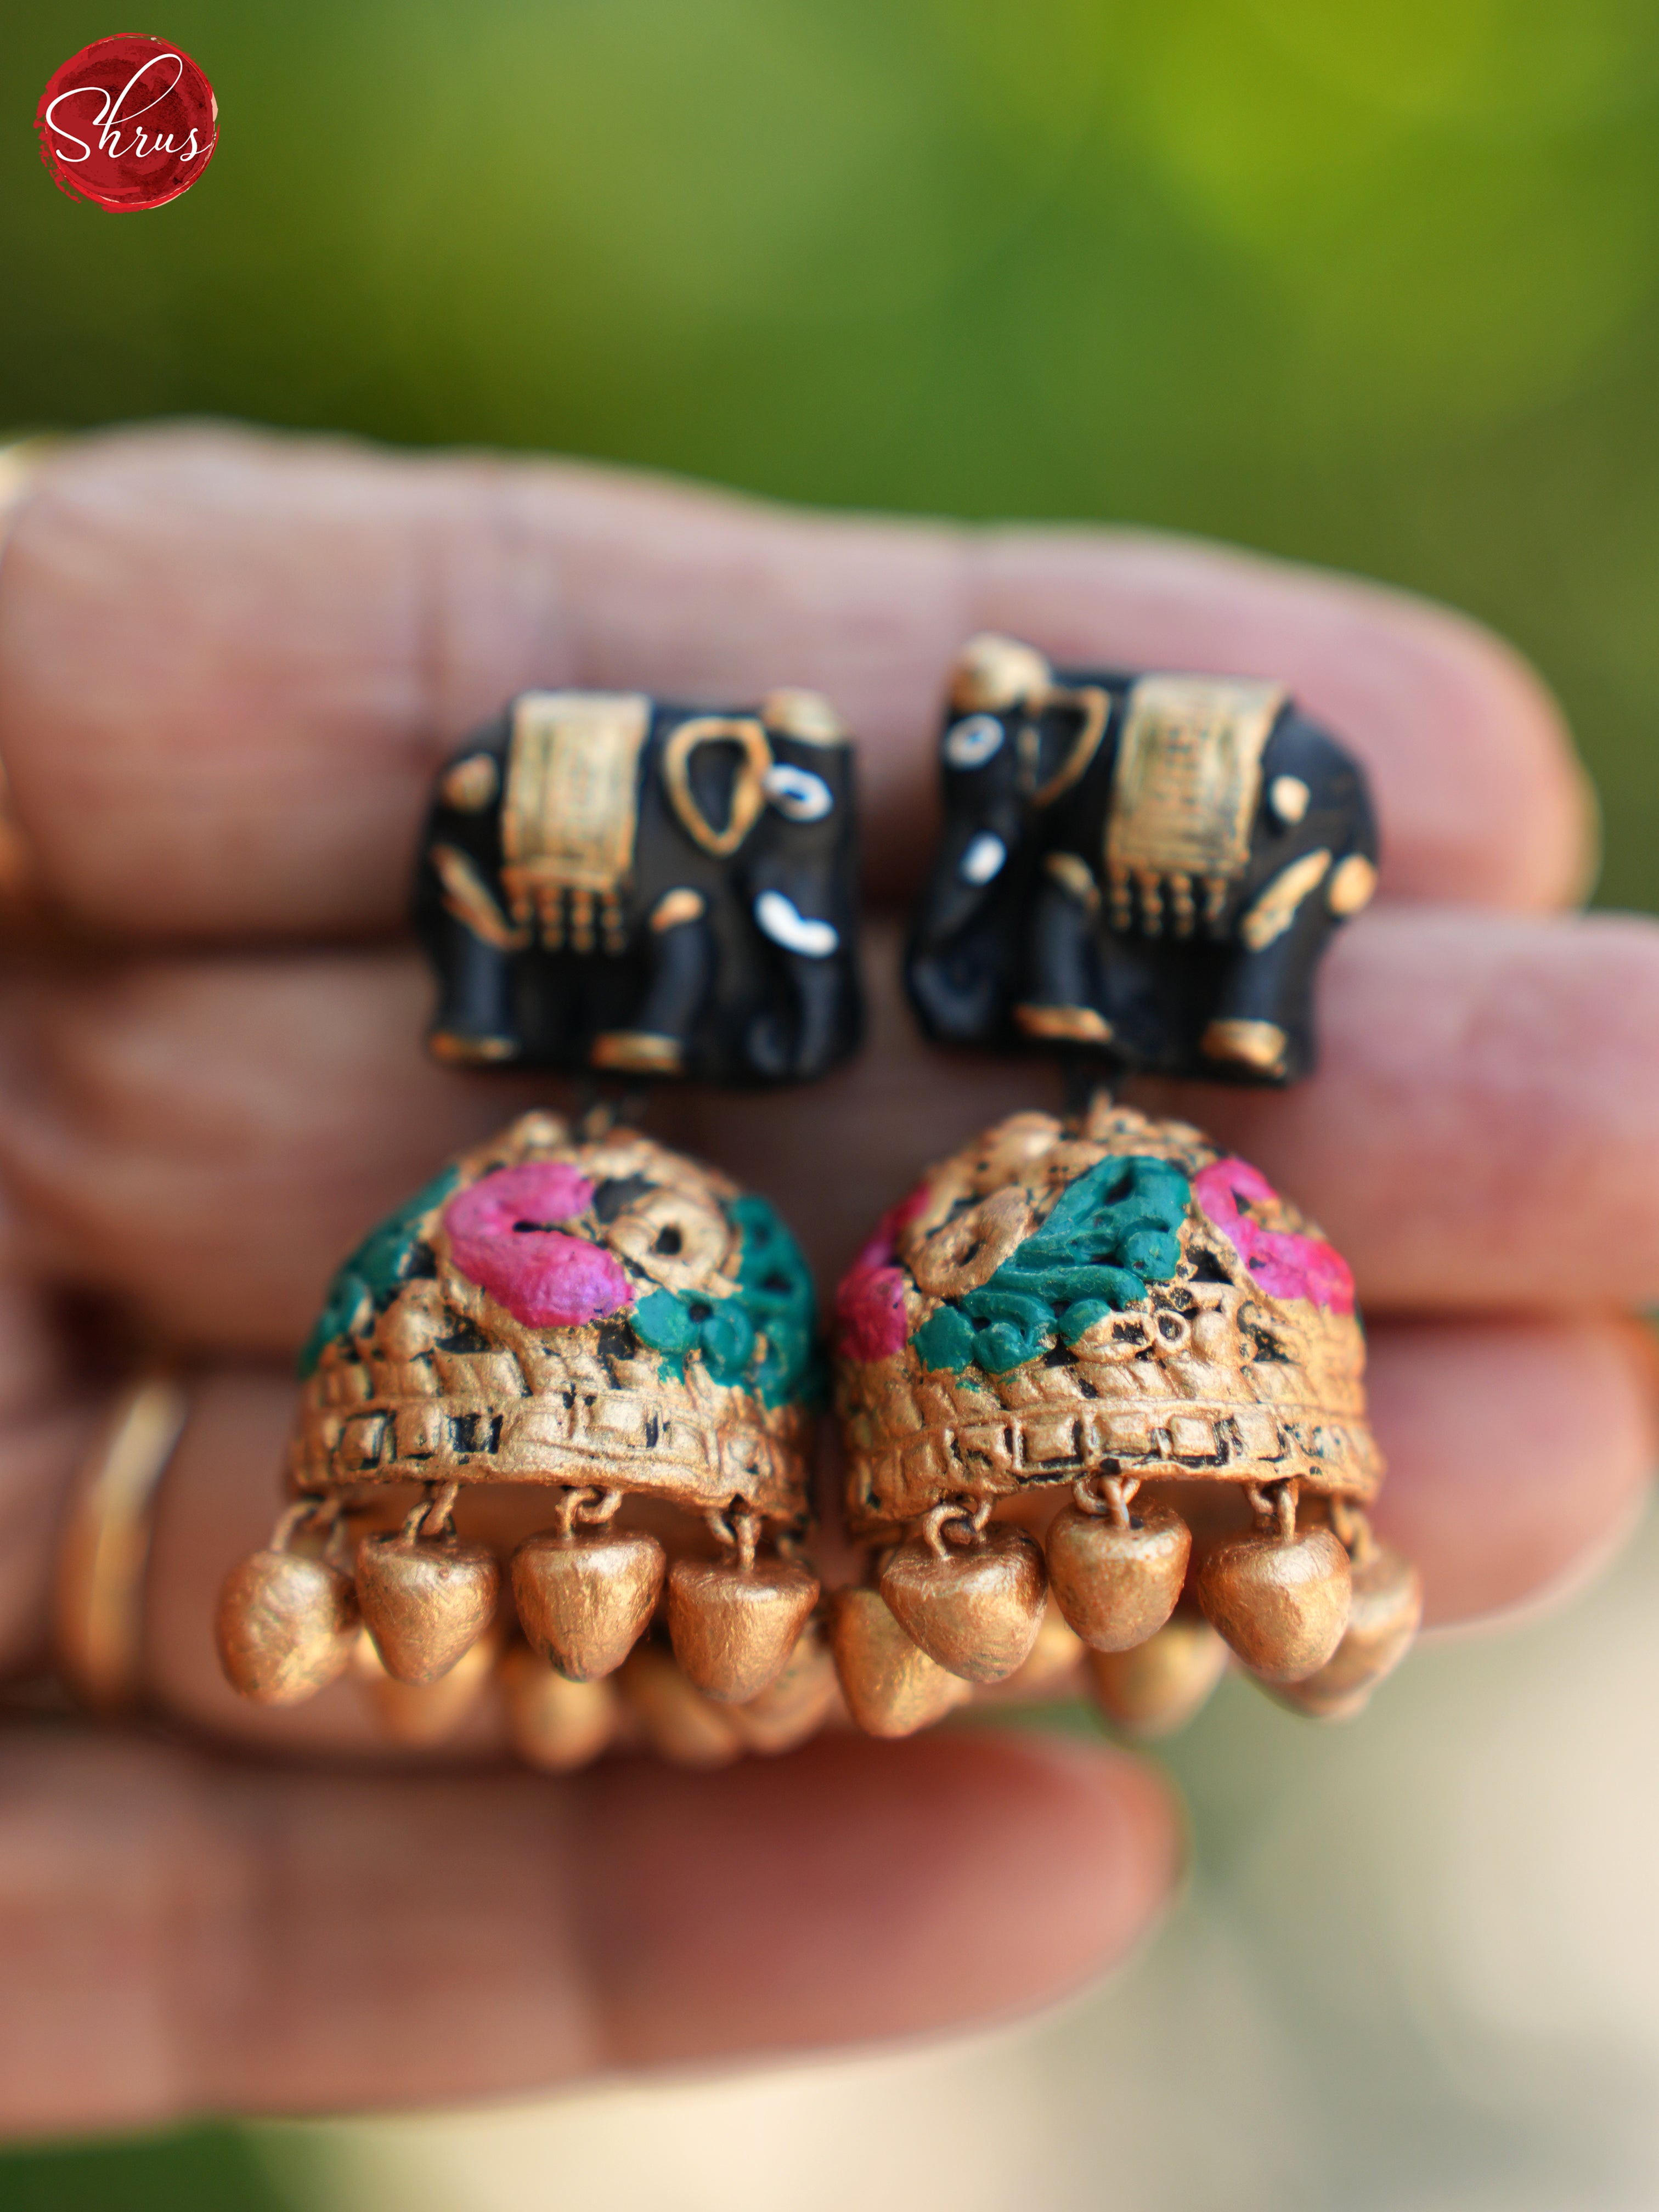 Handcrafted elephant Pendant Terracotta Necklace with jhumkas - Accessories - Shop on ShrusEternity.com